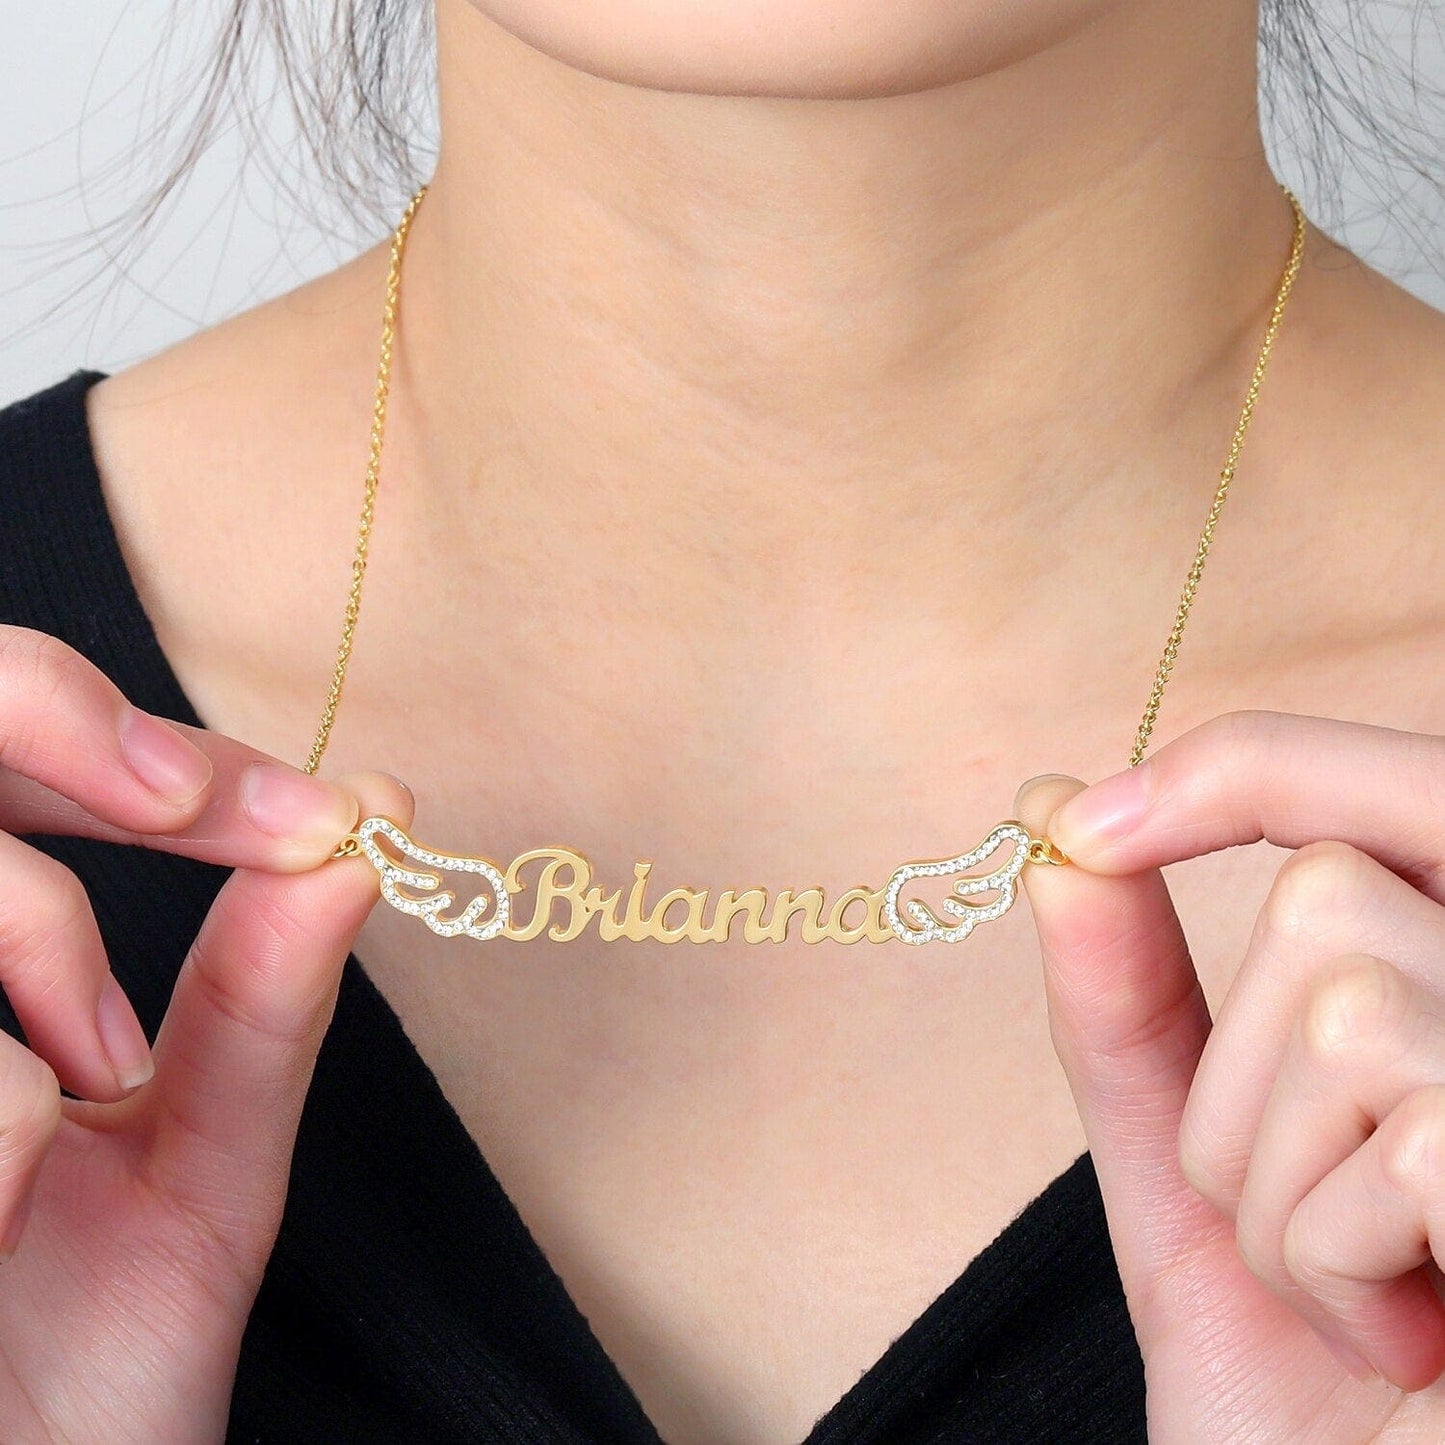 Custom Nameplate Necklace With Angel Wings